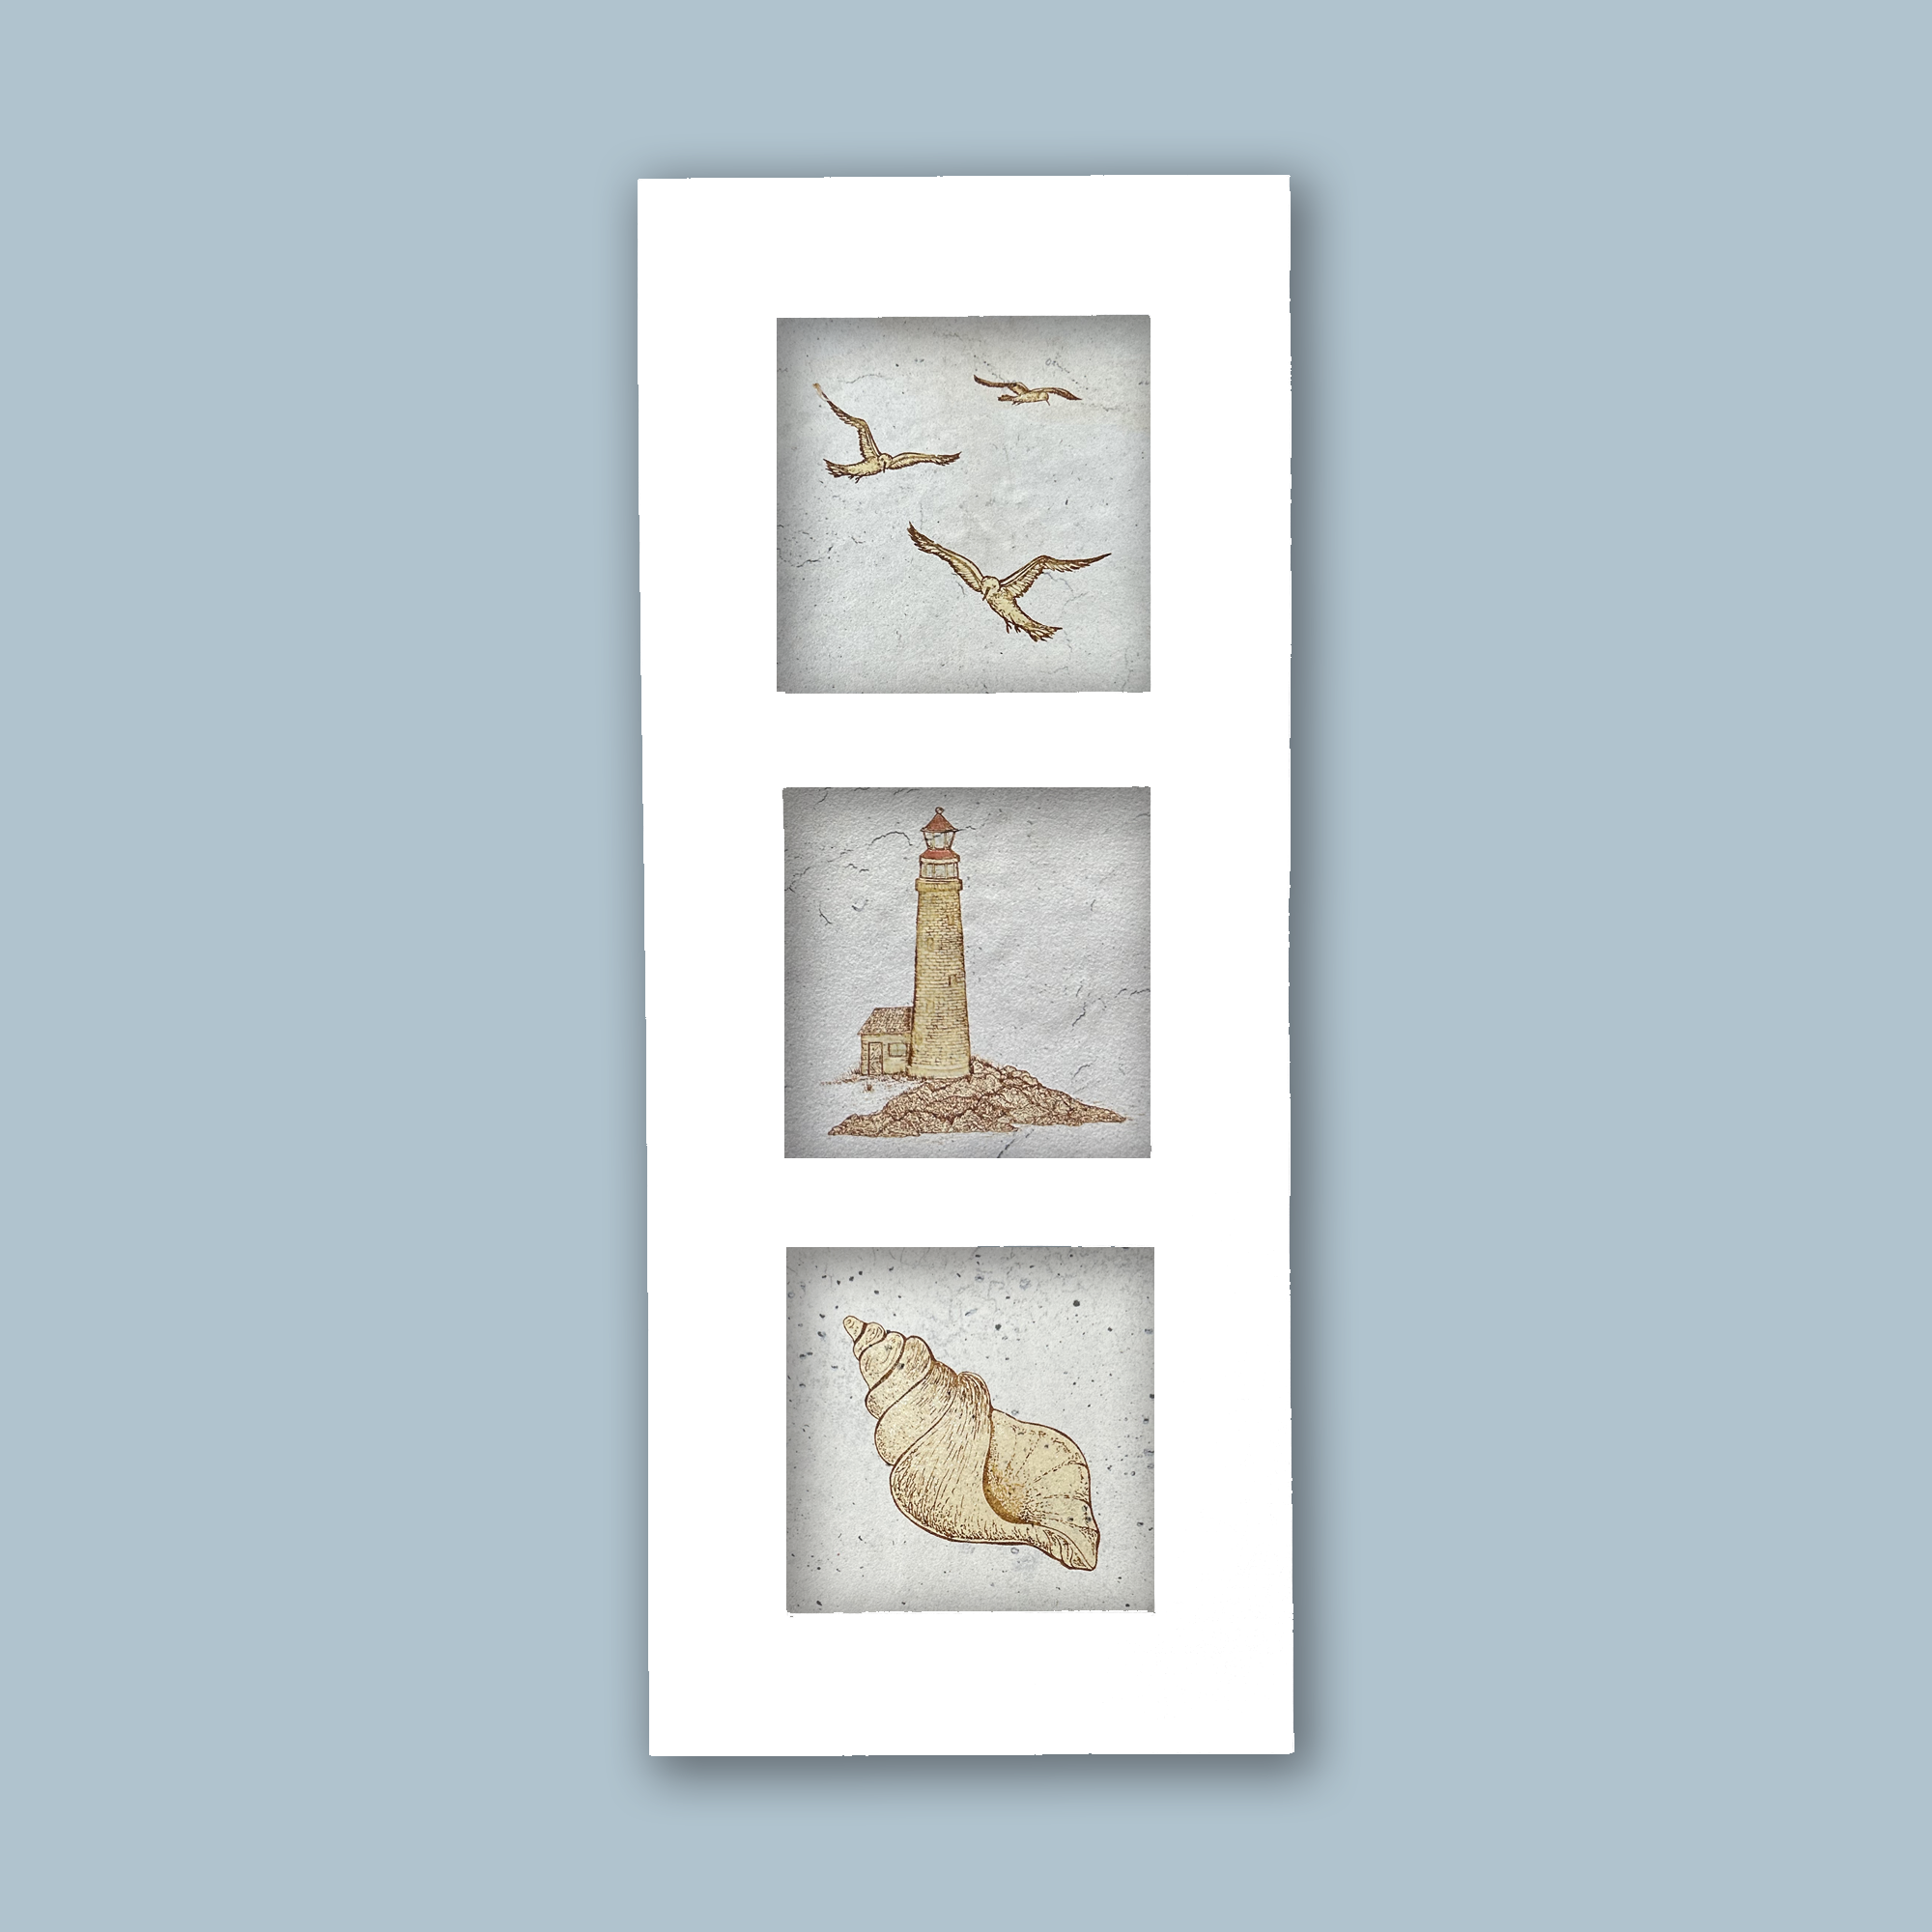 A lighthouse, sea shell and seagulls on beige porcelain tile displayed in a white aluminum frame